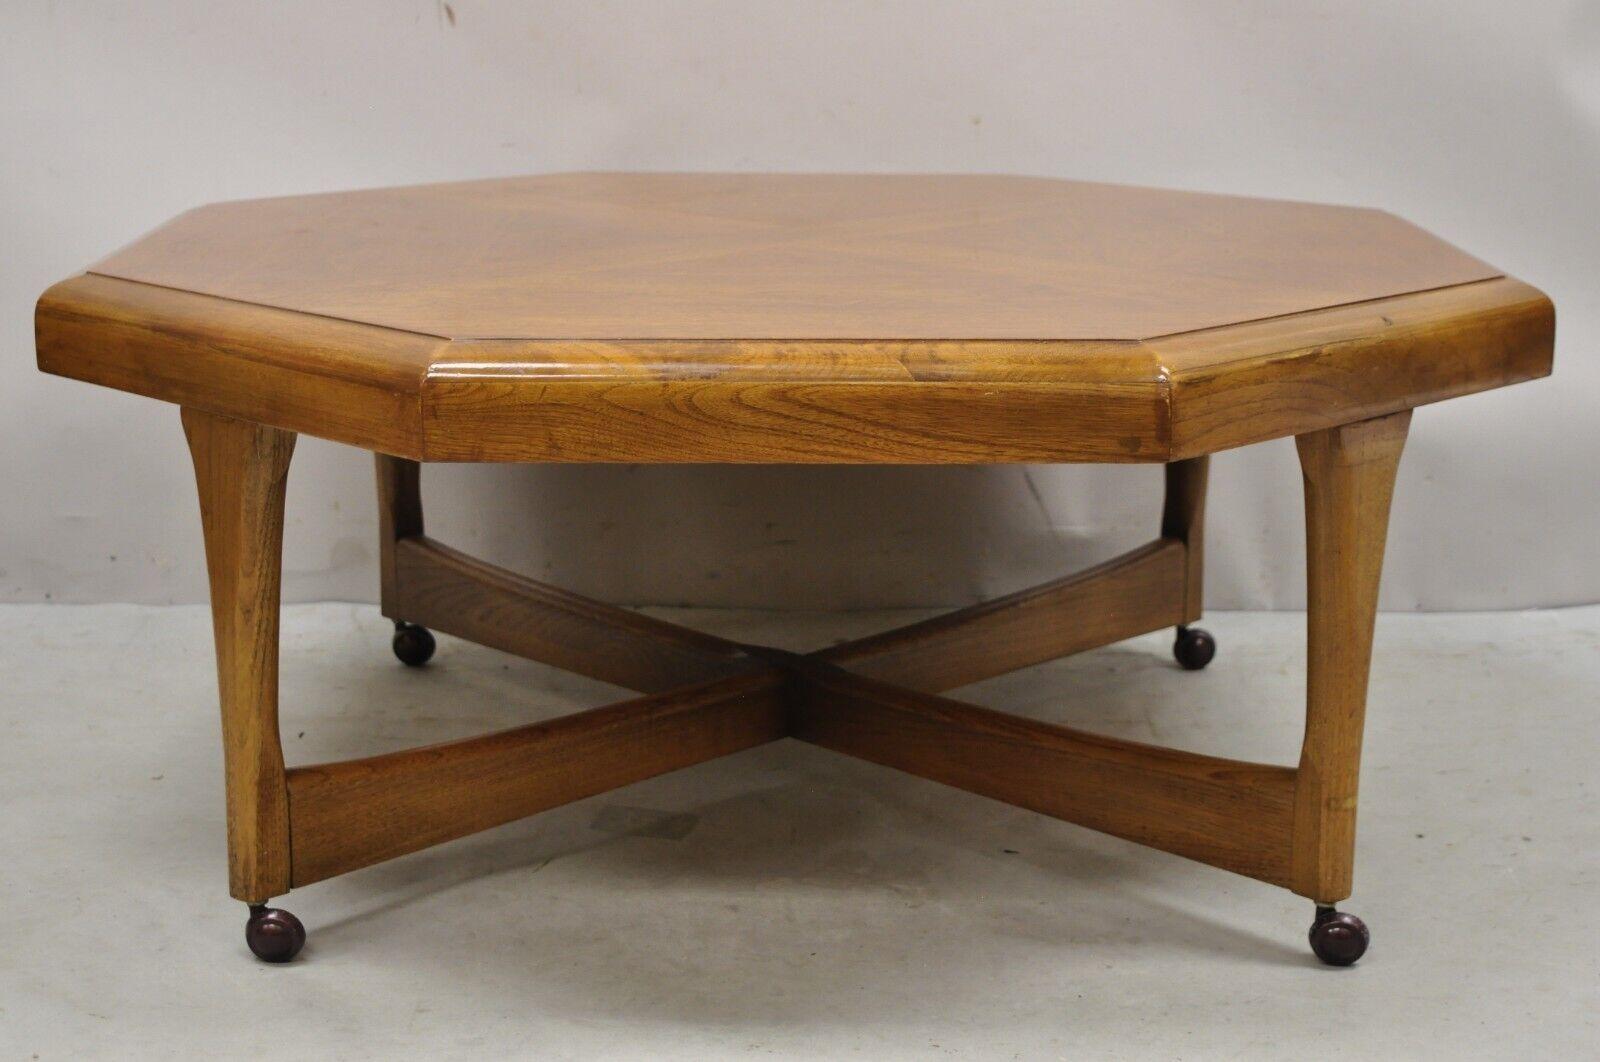 Lane Mid Century Modern Walnut Octagonal Stretcher Base coffee table. Item features a cross stretcher base, rolling casters, octagonal top, beautiful wood grain, original stamp, tapered legs, clean modernist lines. Age: Mid 20th